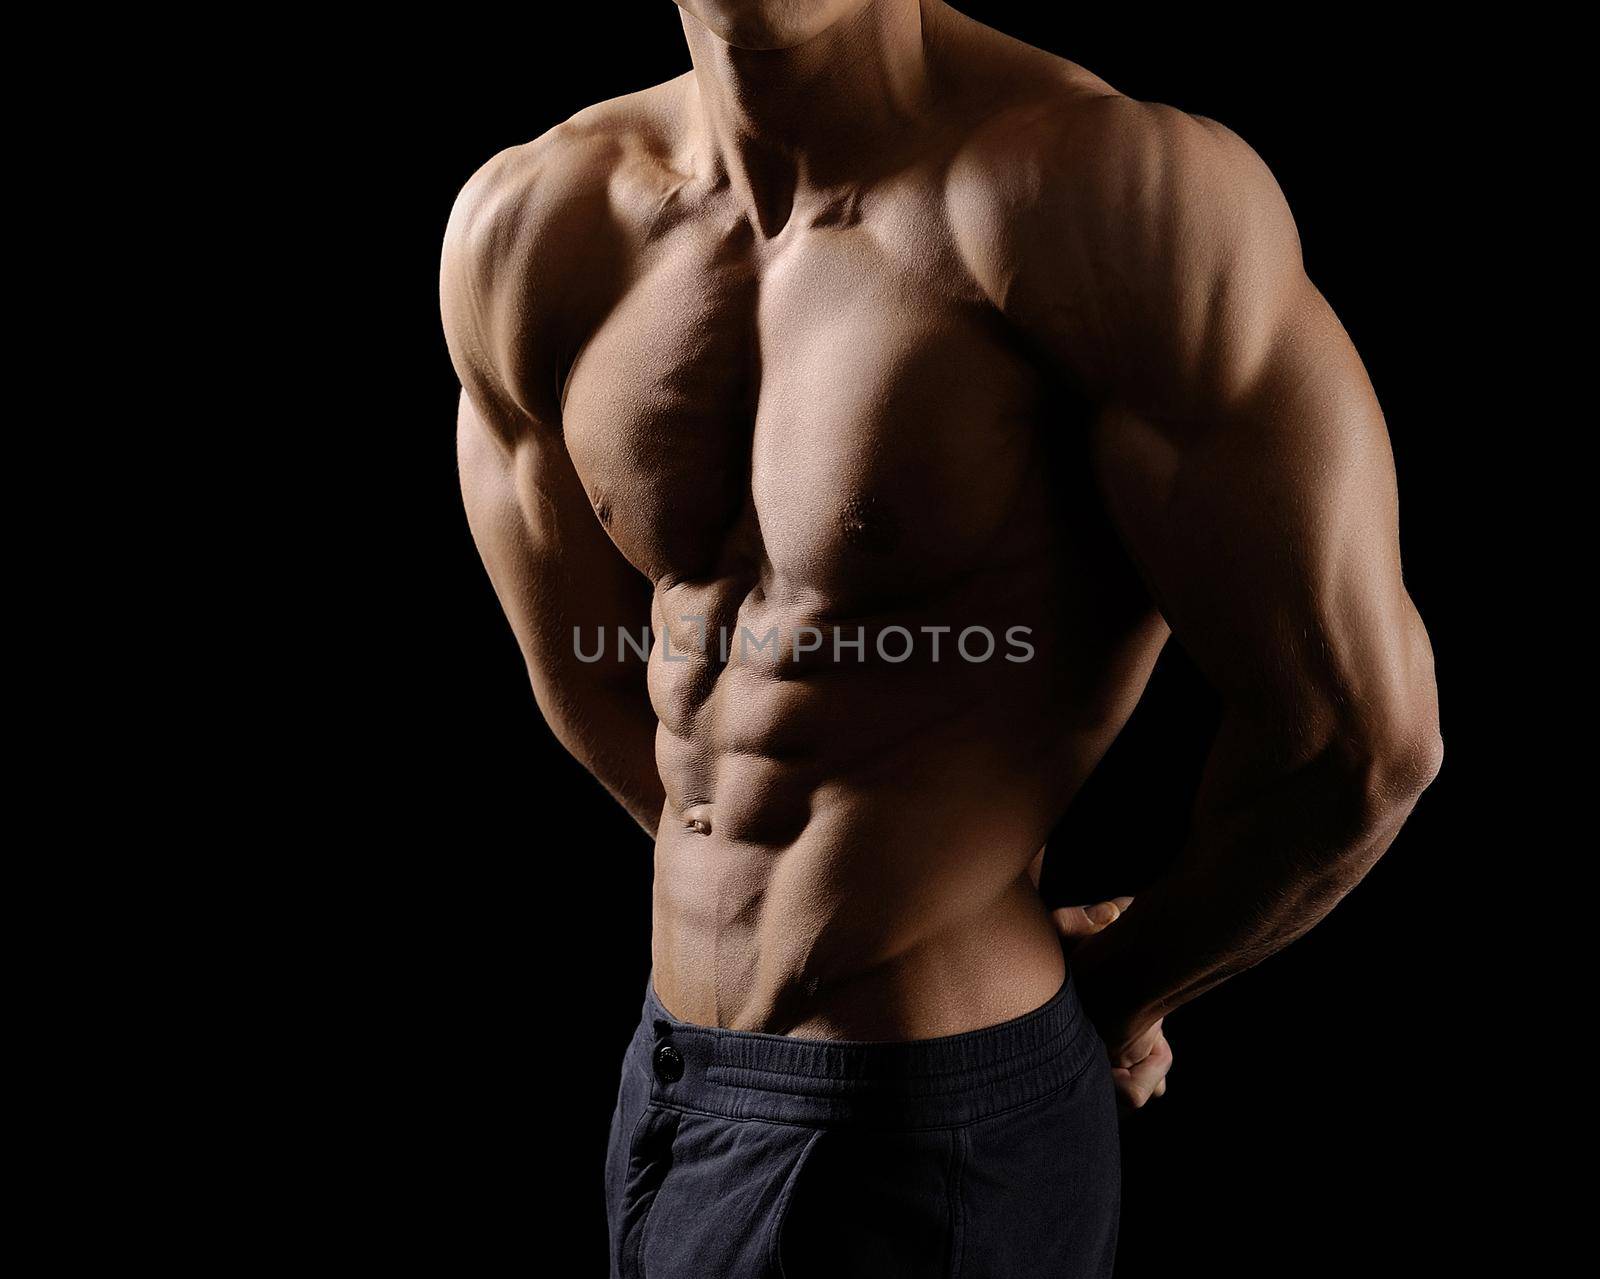 He lives with sports. Cropped shot of a male bodybuilder showing off his ripped abs posing shirtless in studio